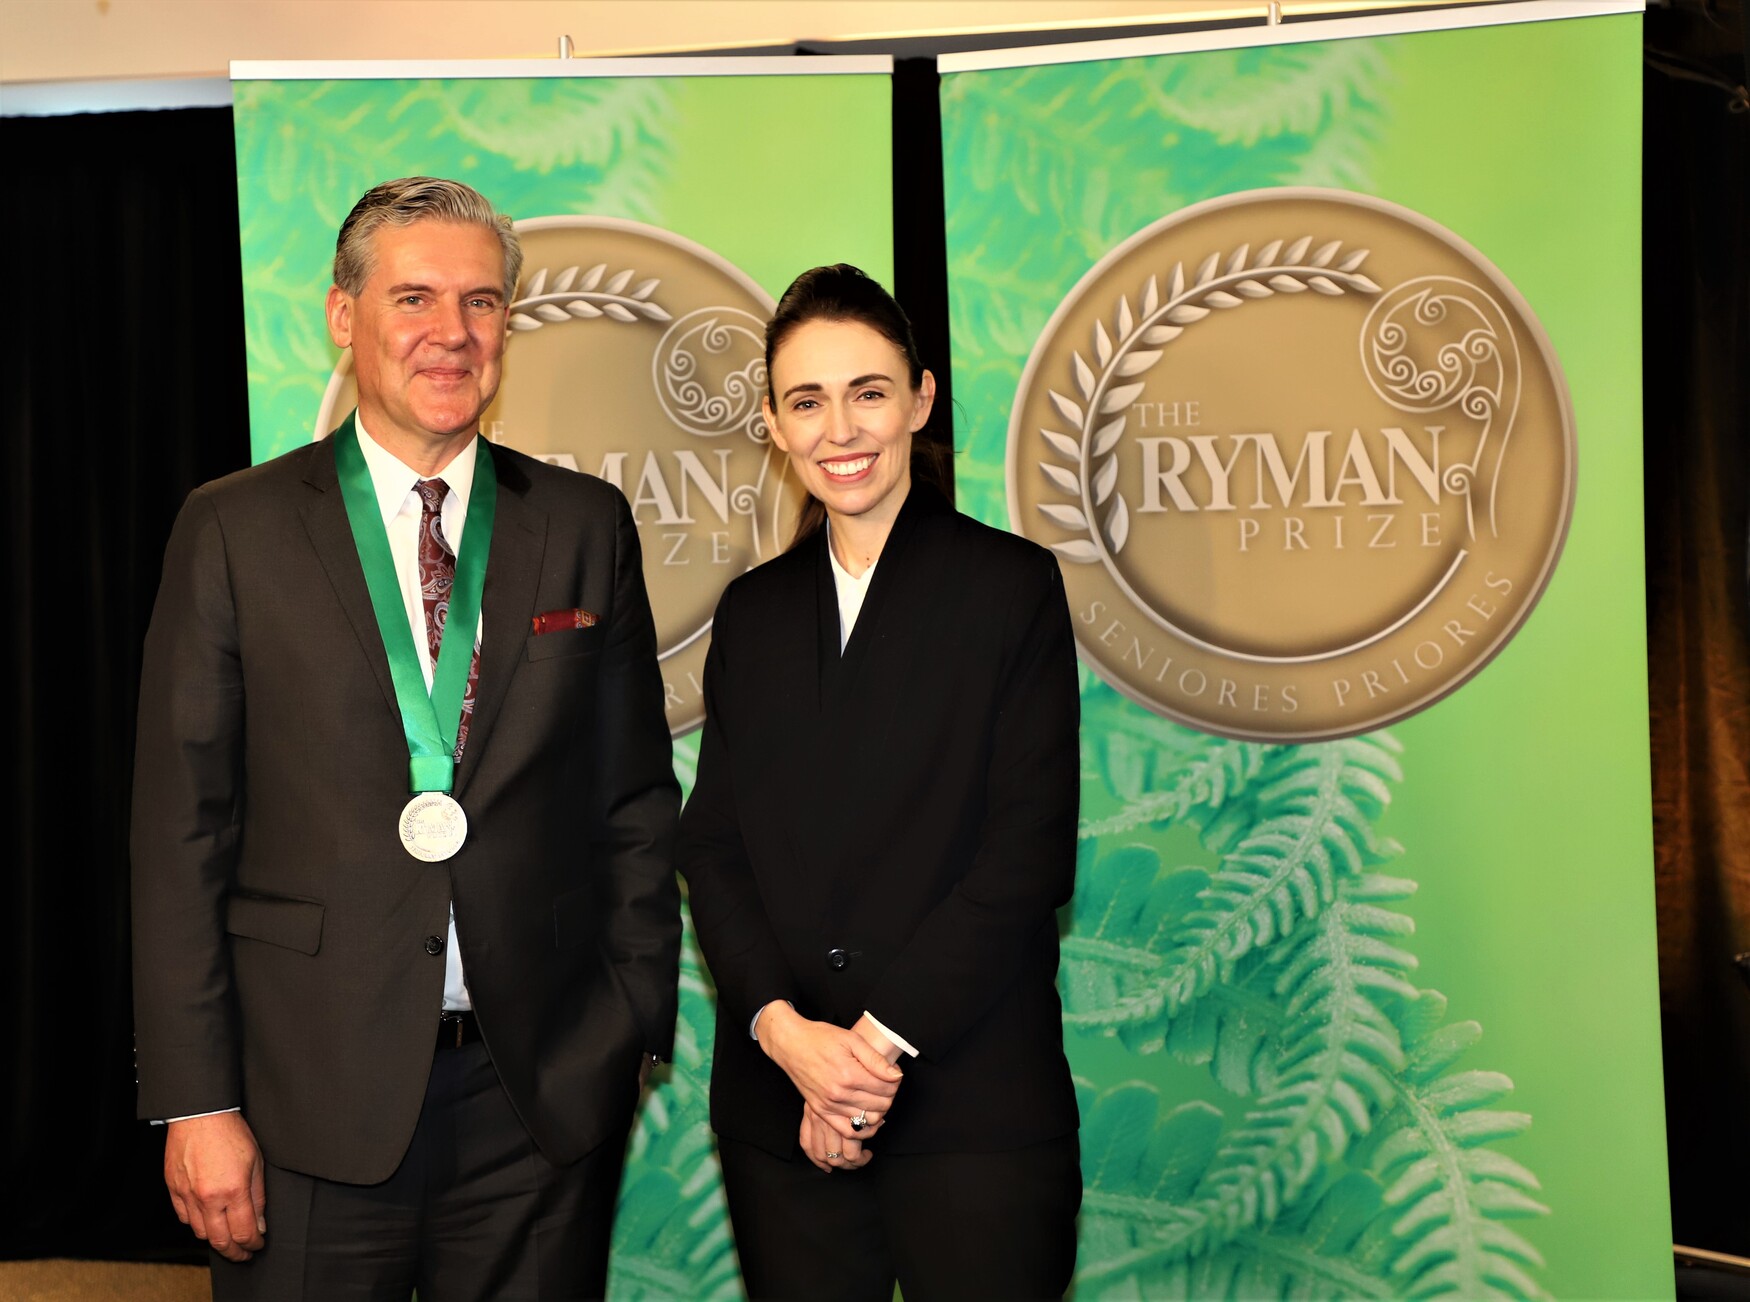 Dr Michael Fehlings with New Zealand Prime Minister Jacinda Ardern, Receving the Ryman Prize